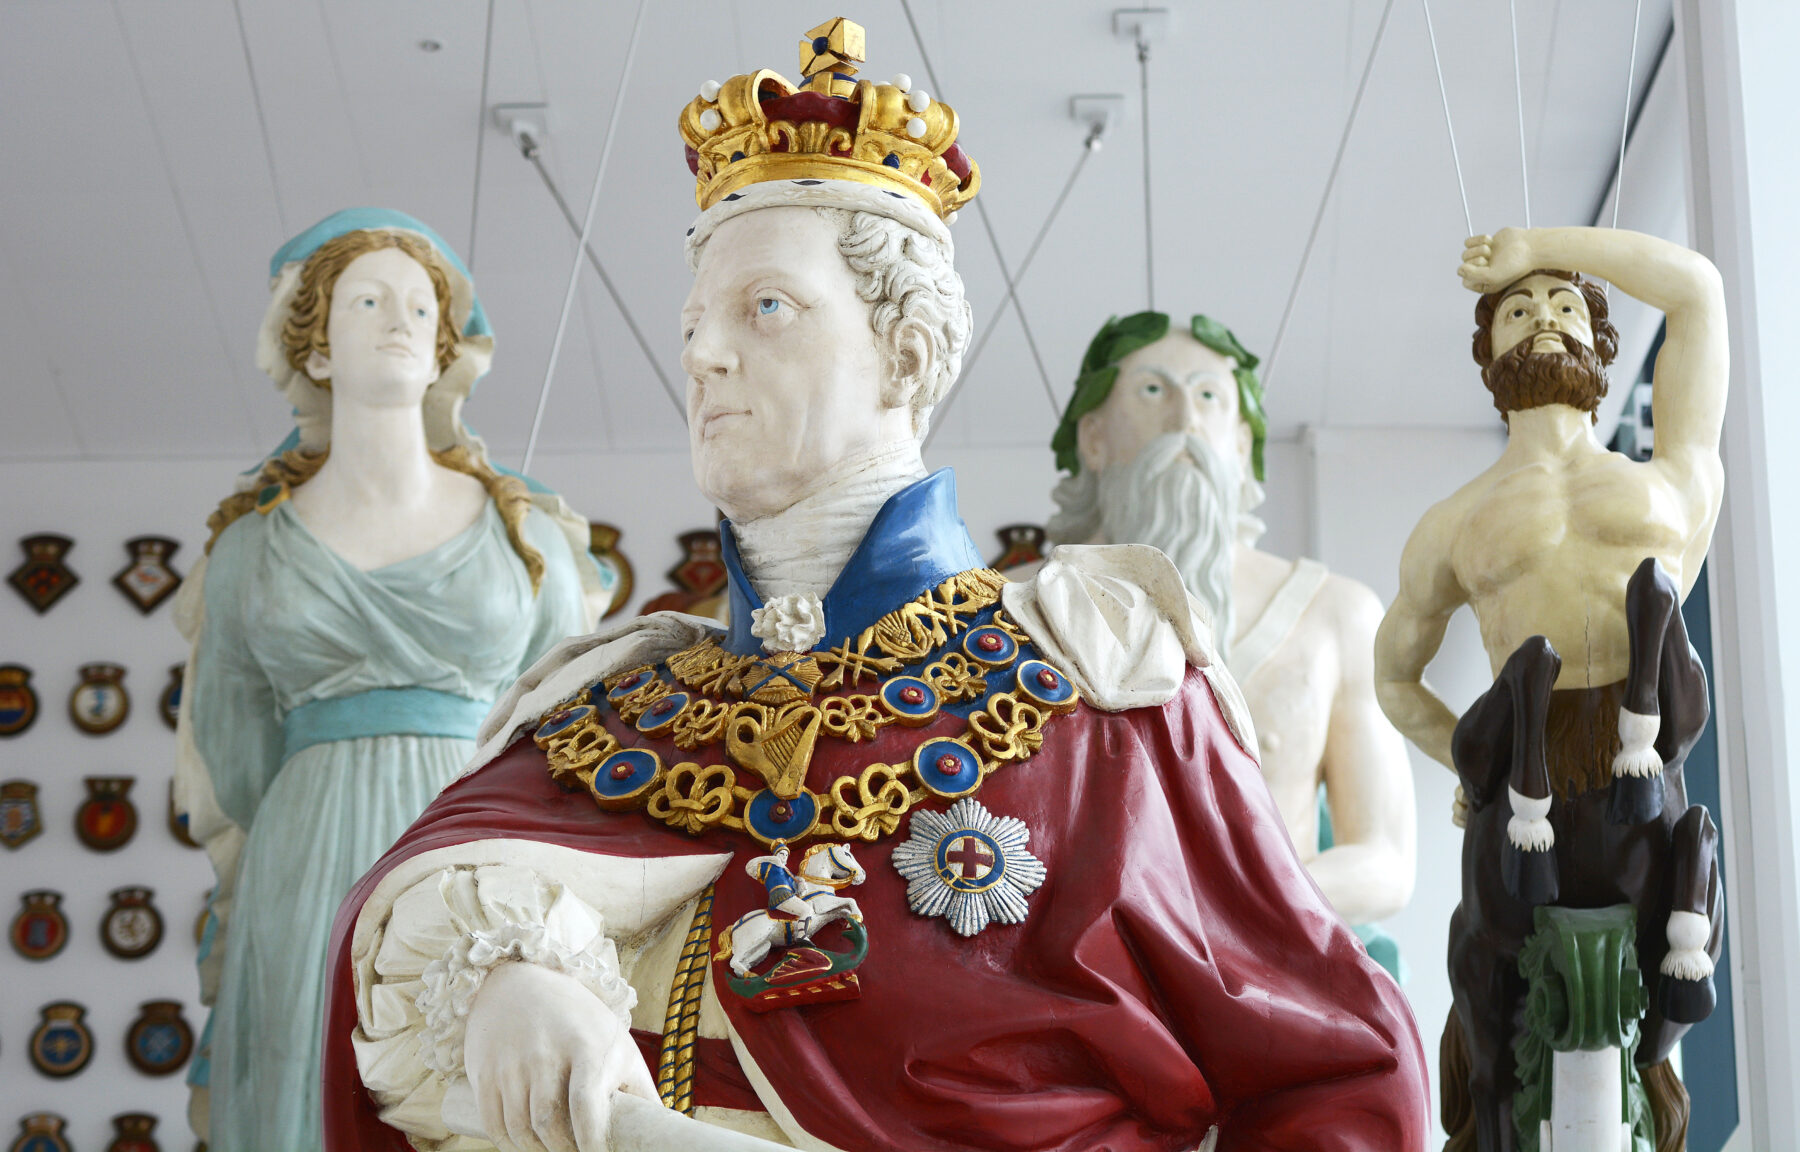 Royal Naval ship's figureheads on display at The Box, Plymouth